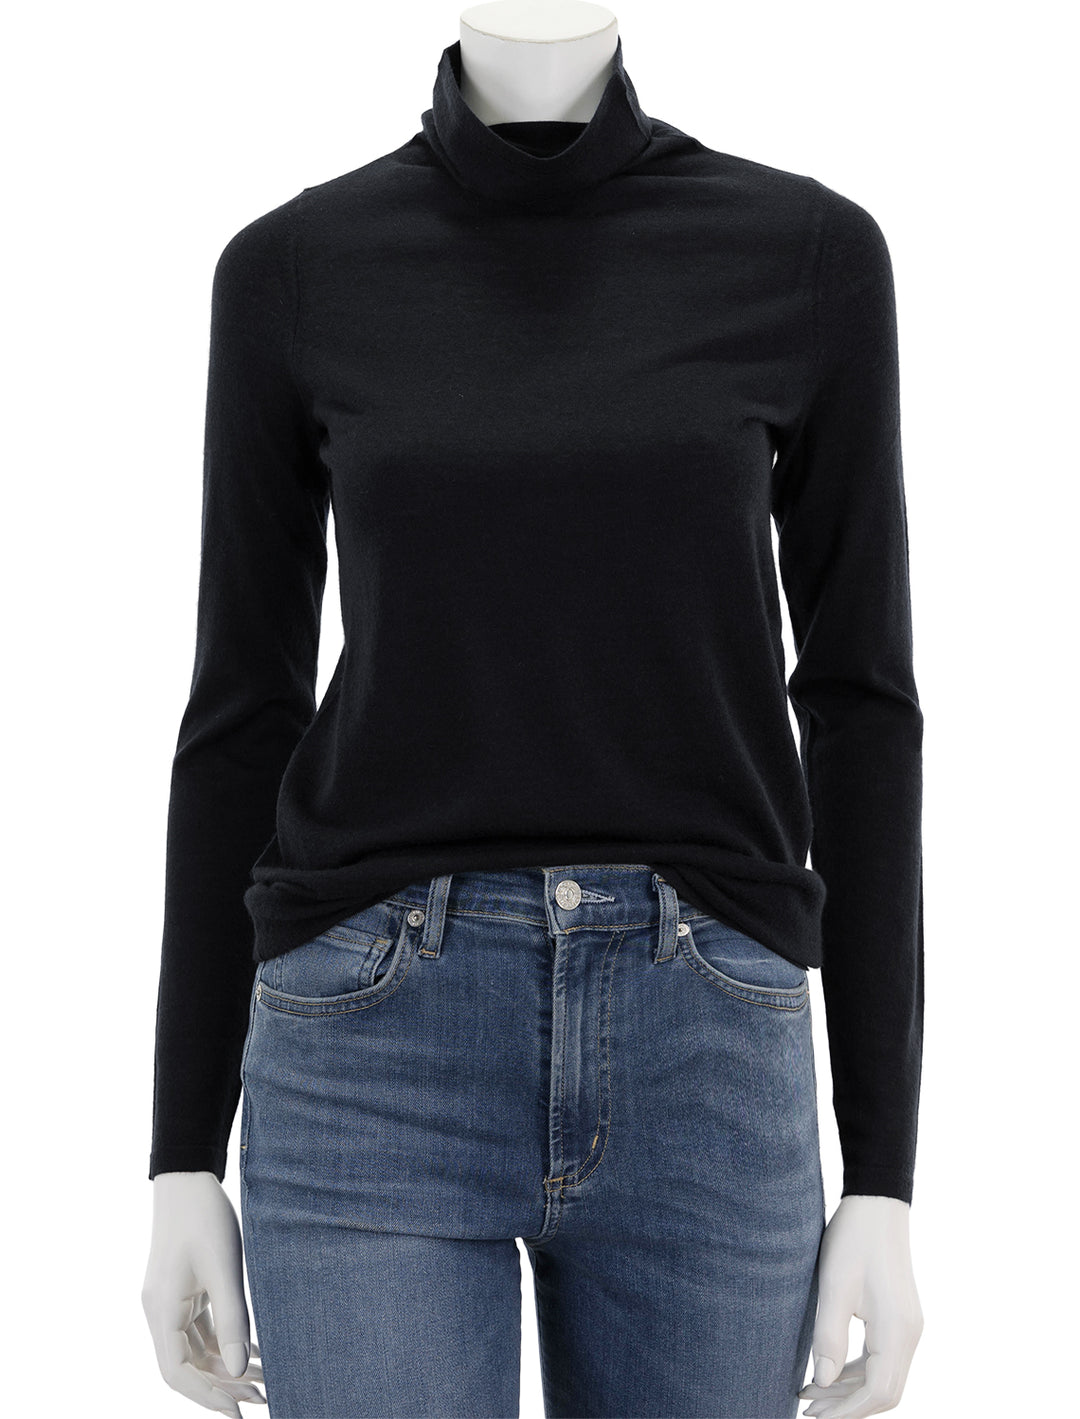 Front view of Ann Mashburn's funnel neck cashmere sweater in black.